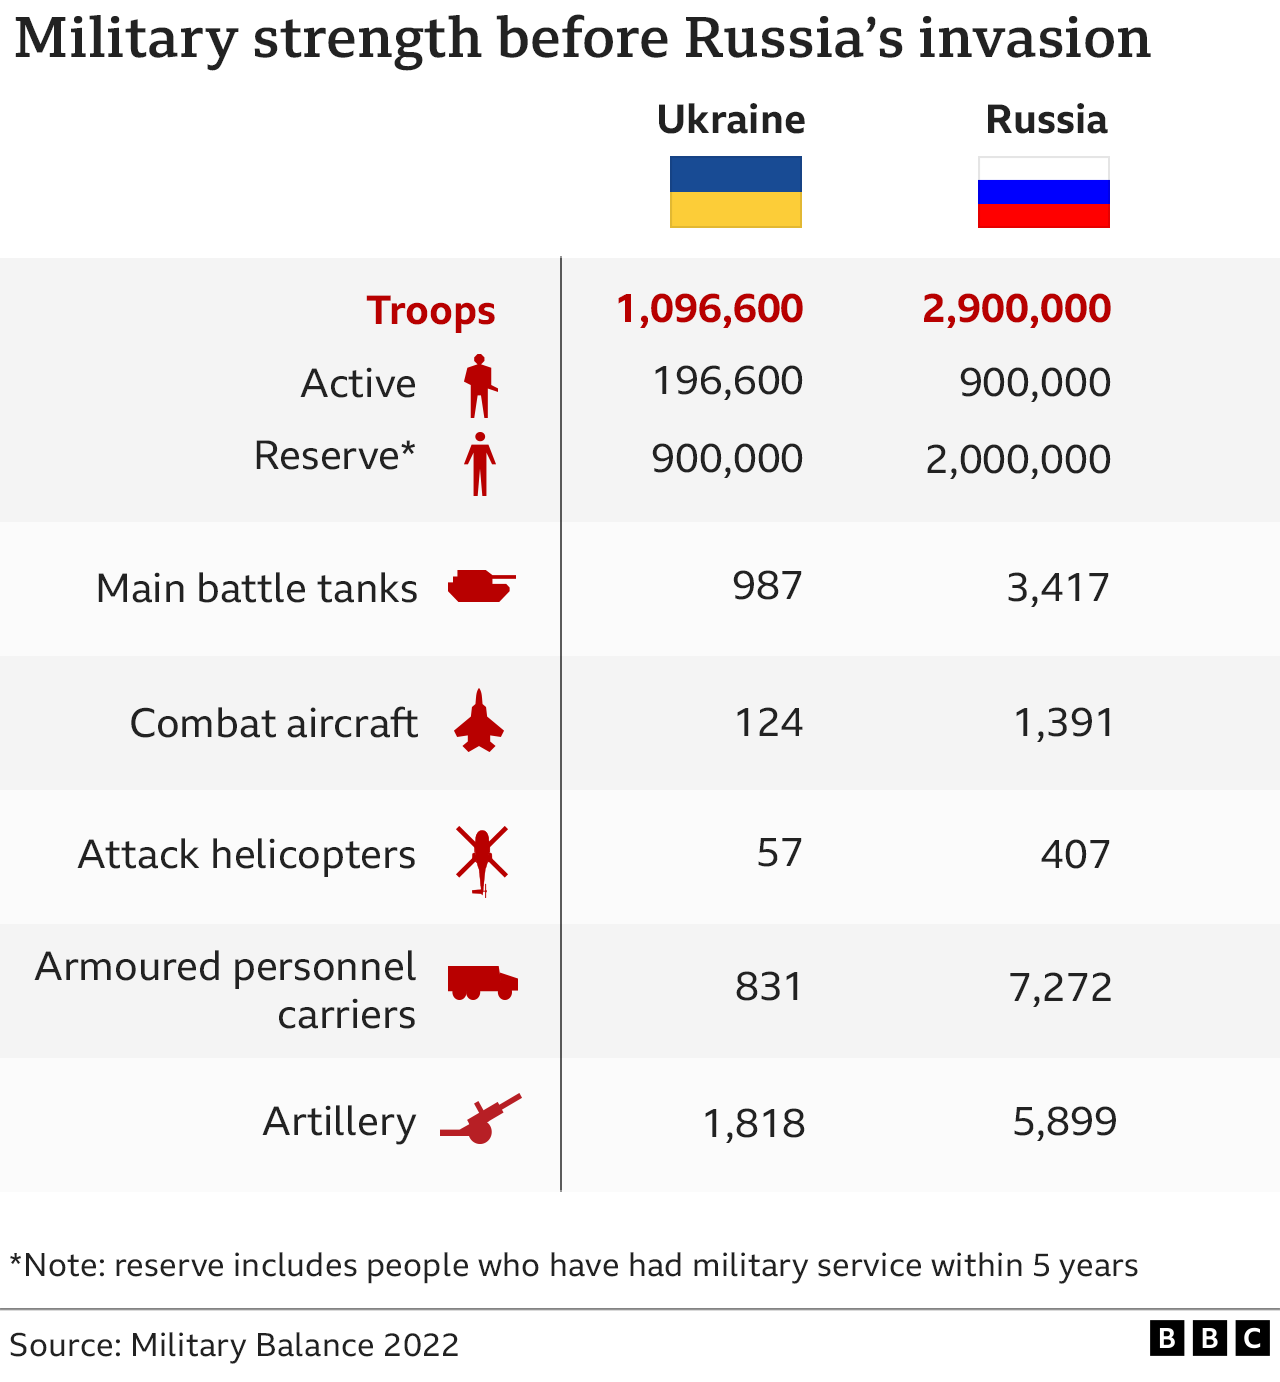 Table comparing Russian and Ukranian mililtary strength before the invasion